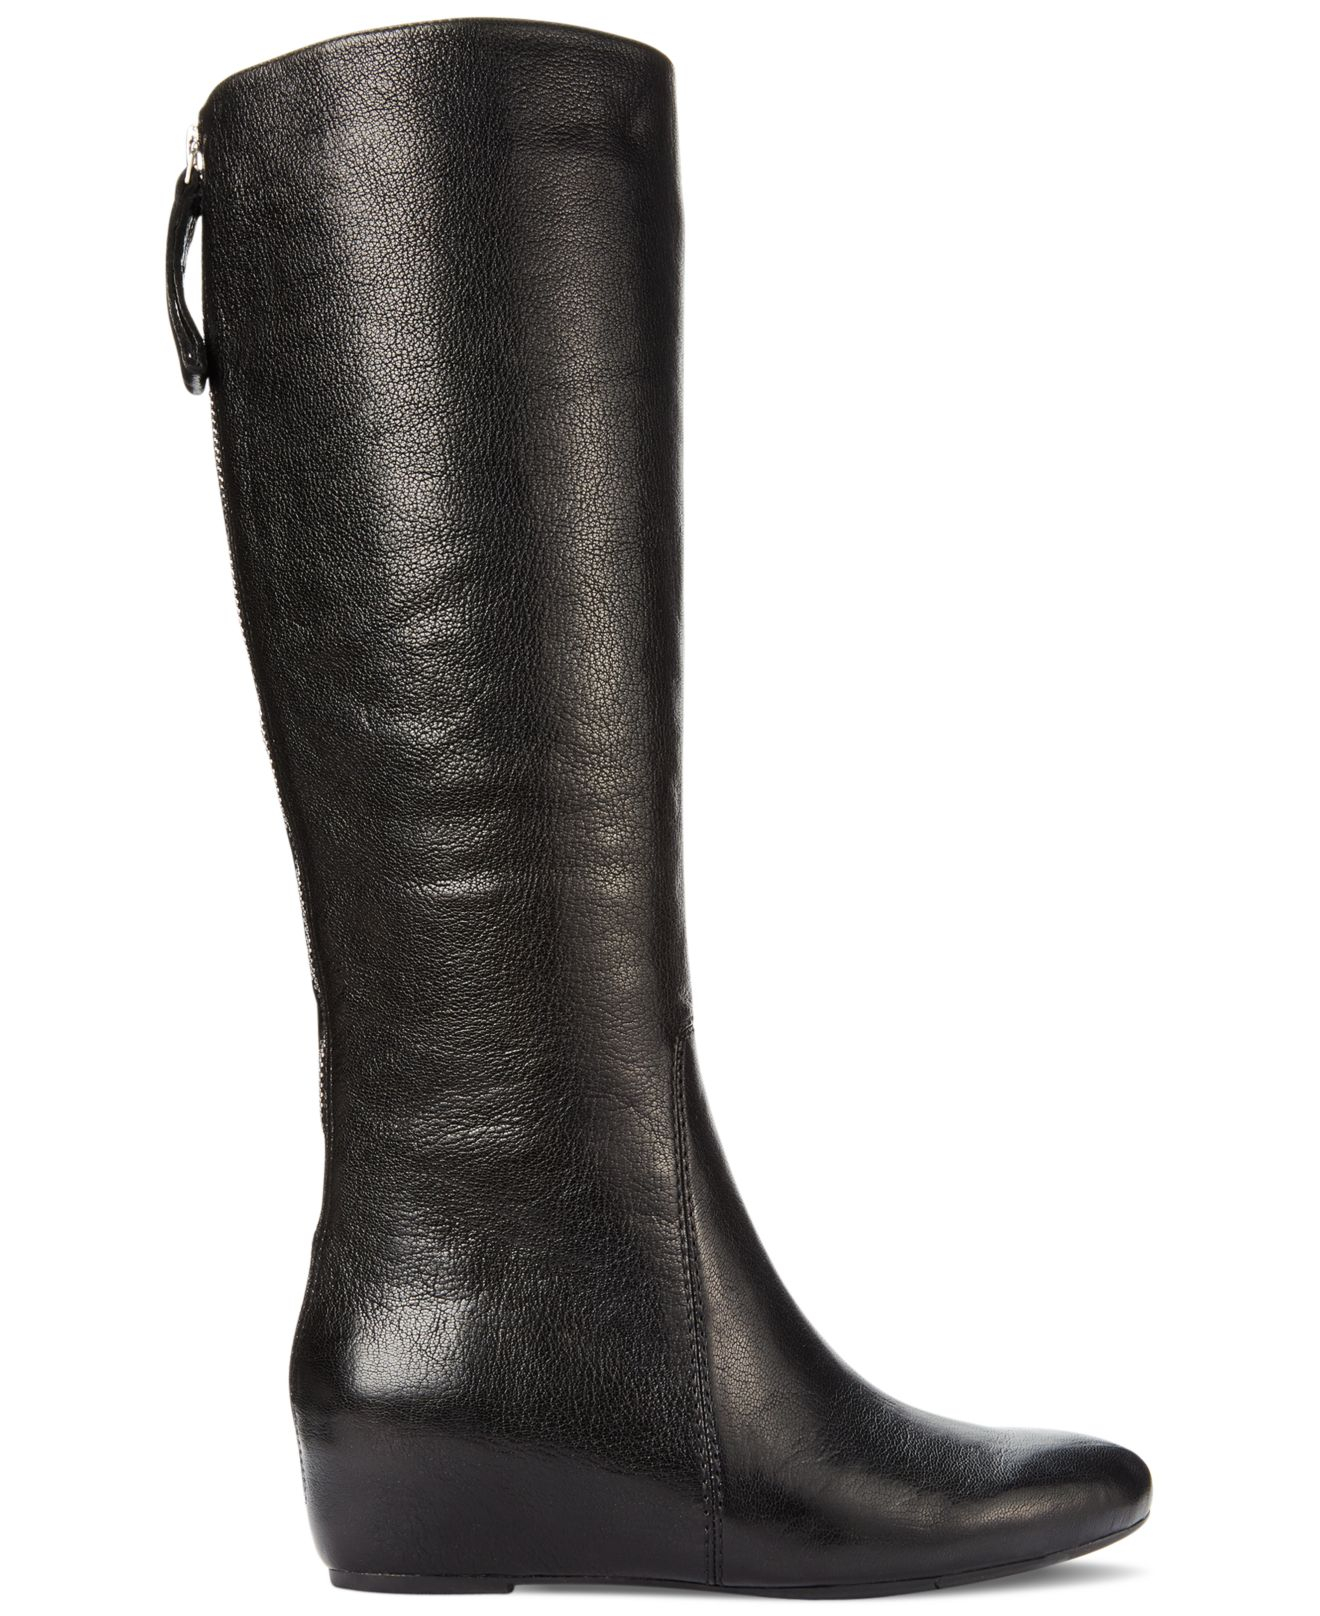 Tall Black Leather Wedge Boots - Online Boots